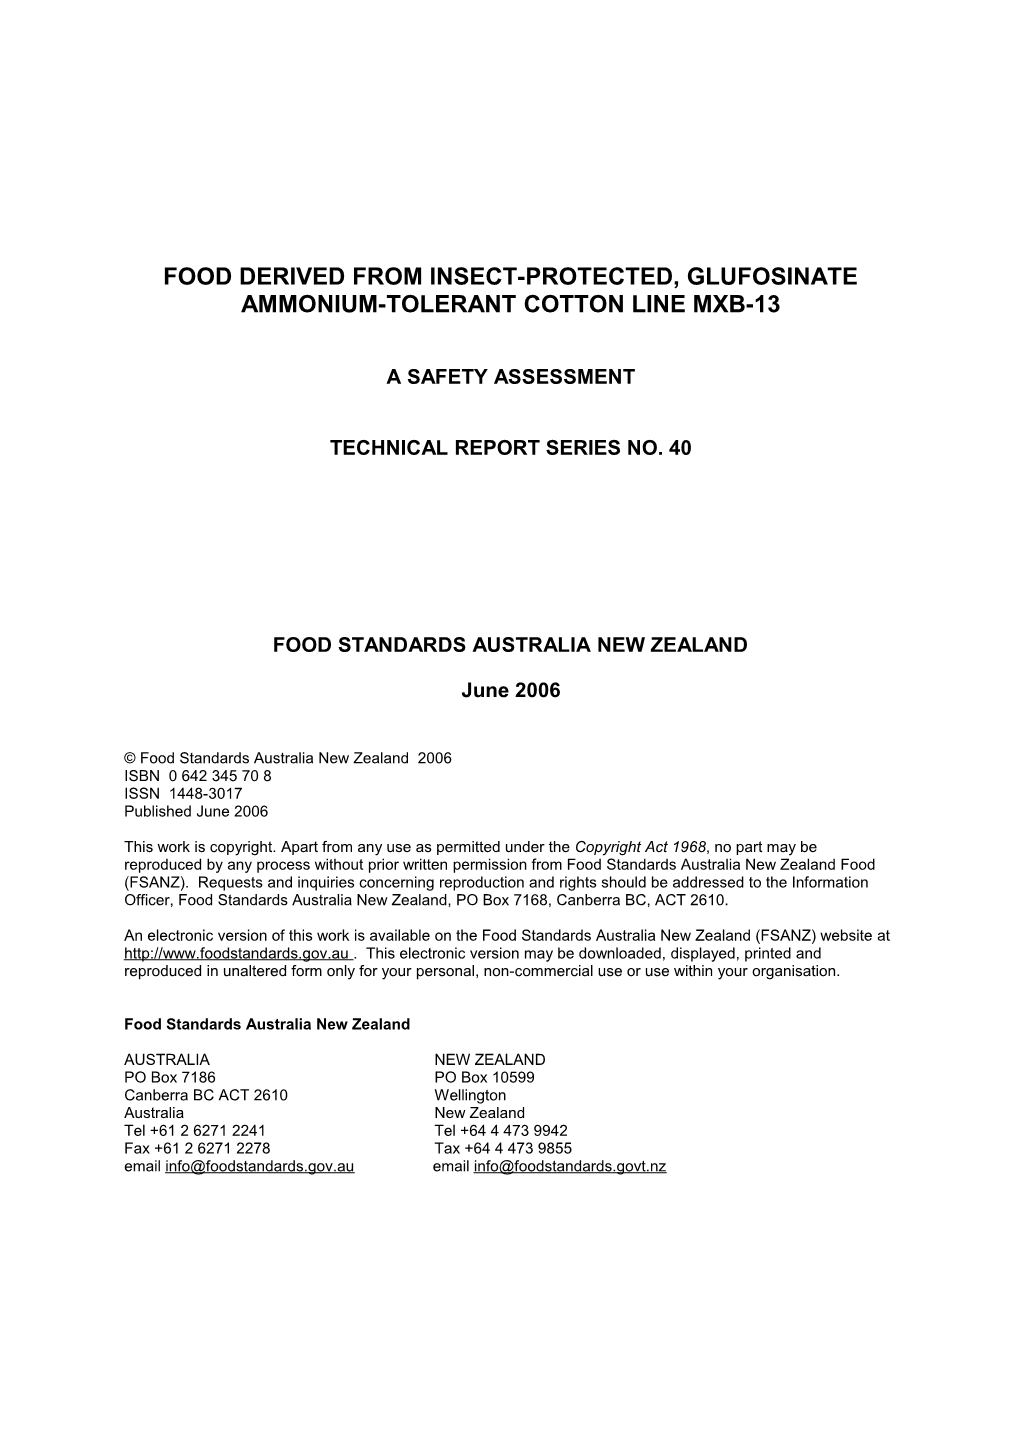 Food Derived from Insect-Protected, Glufosinate Ammonium-Tolerant Cotton Line Mxb-13